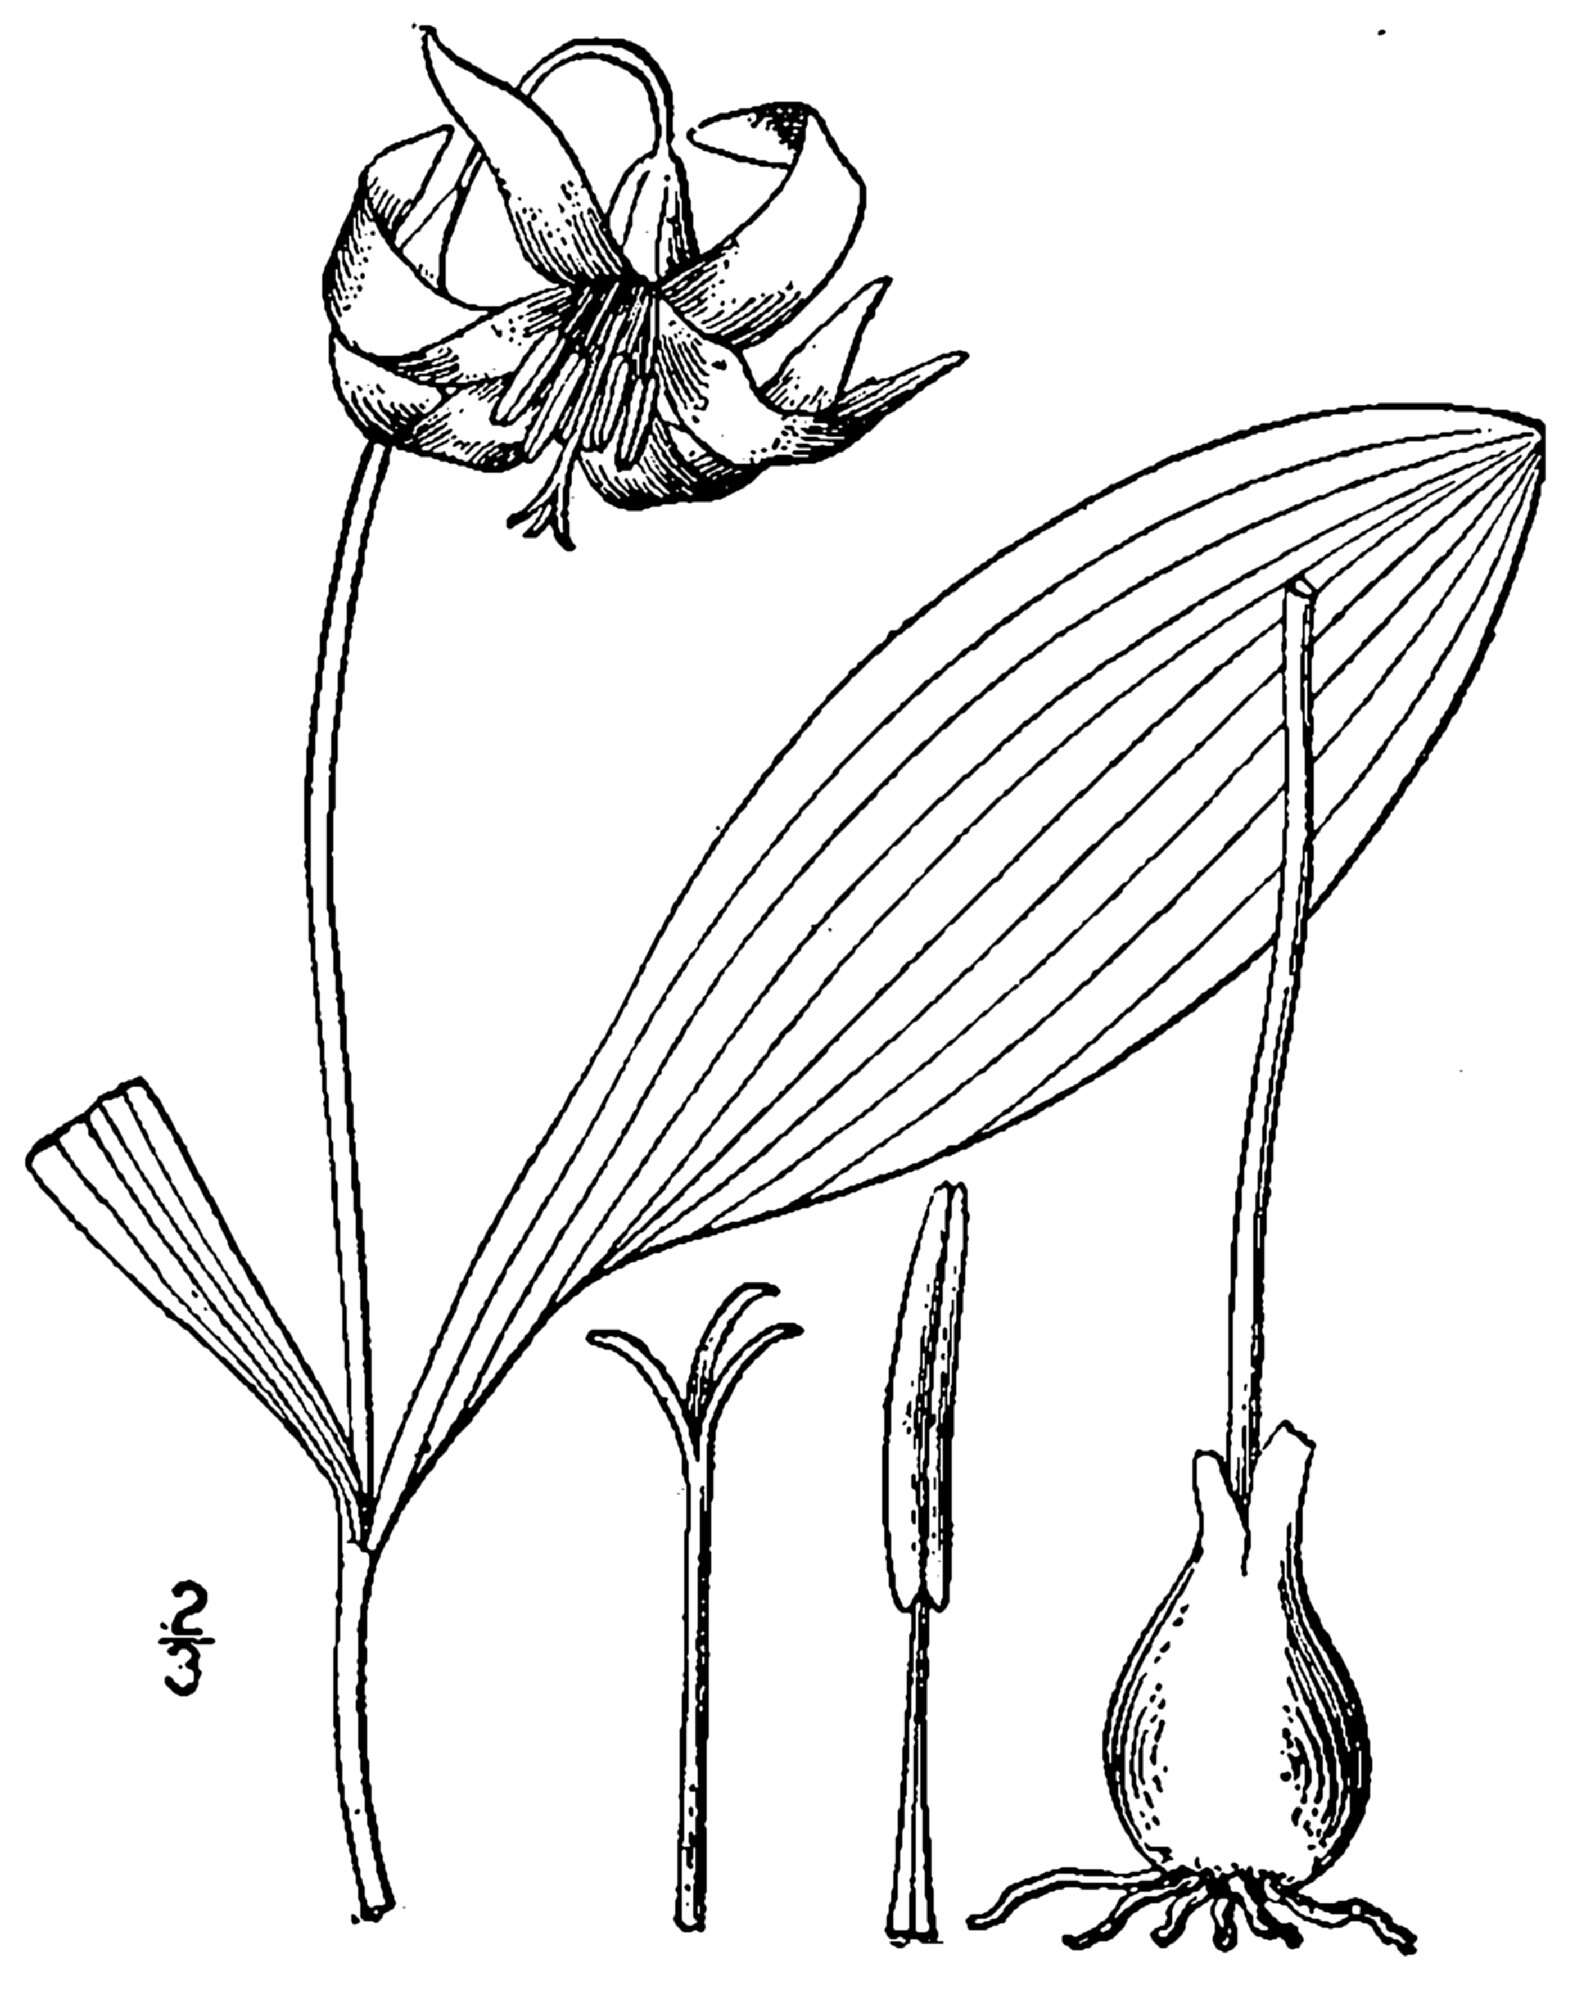 Image of white fawnlily